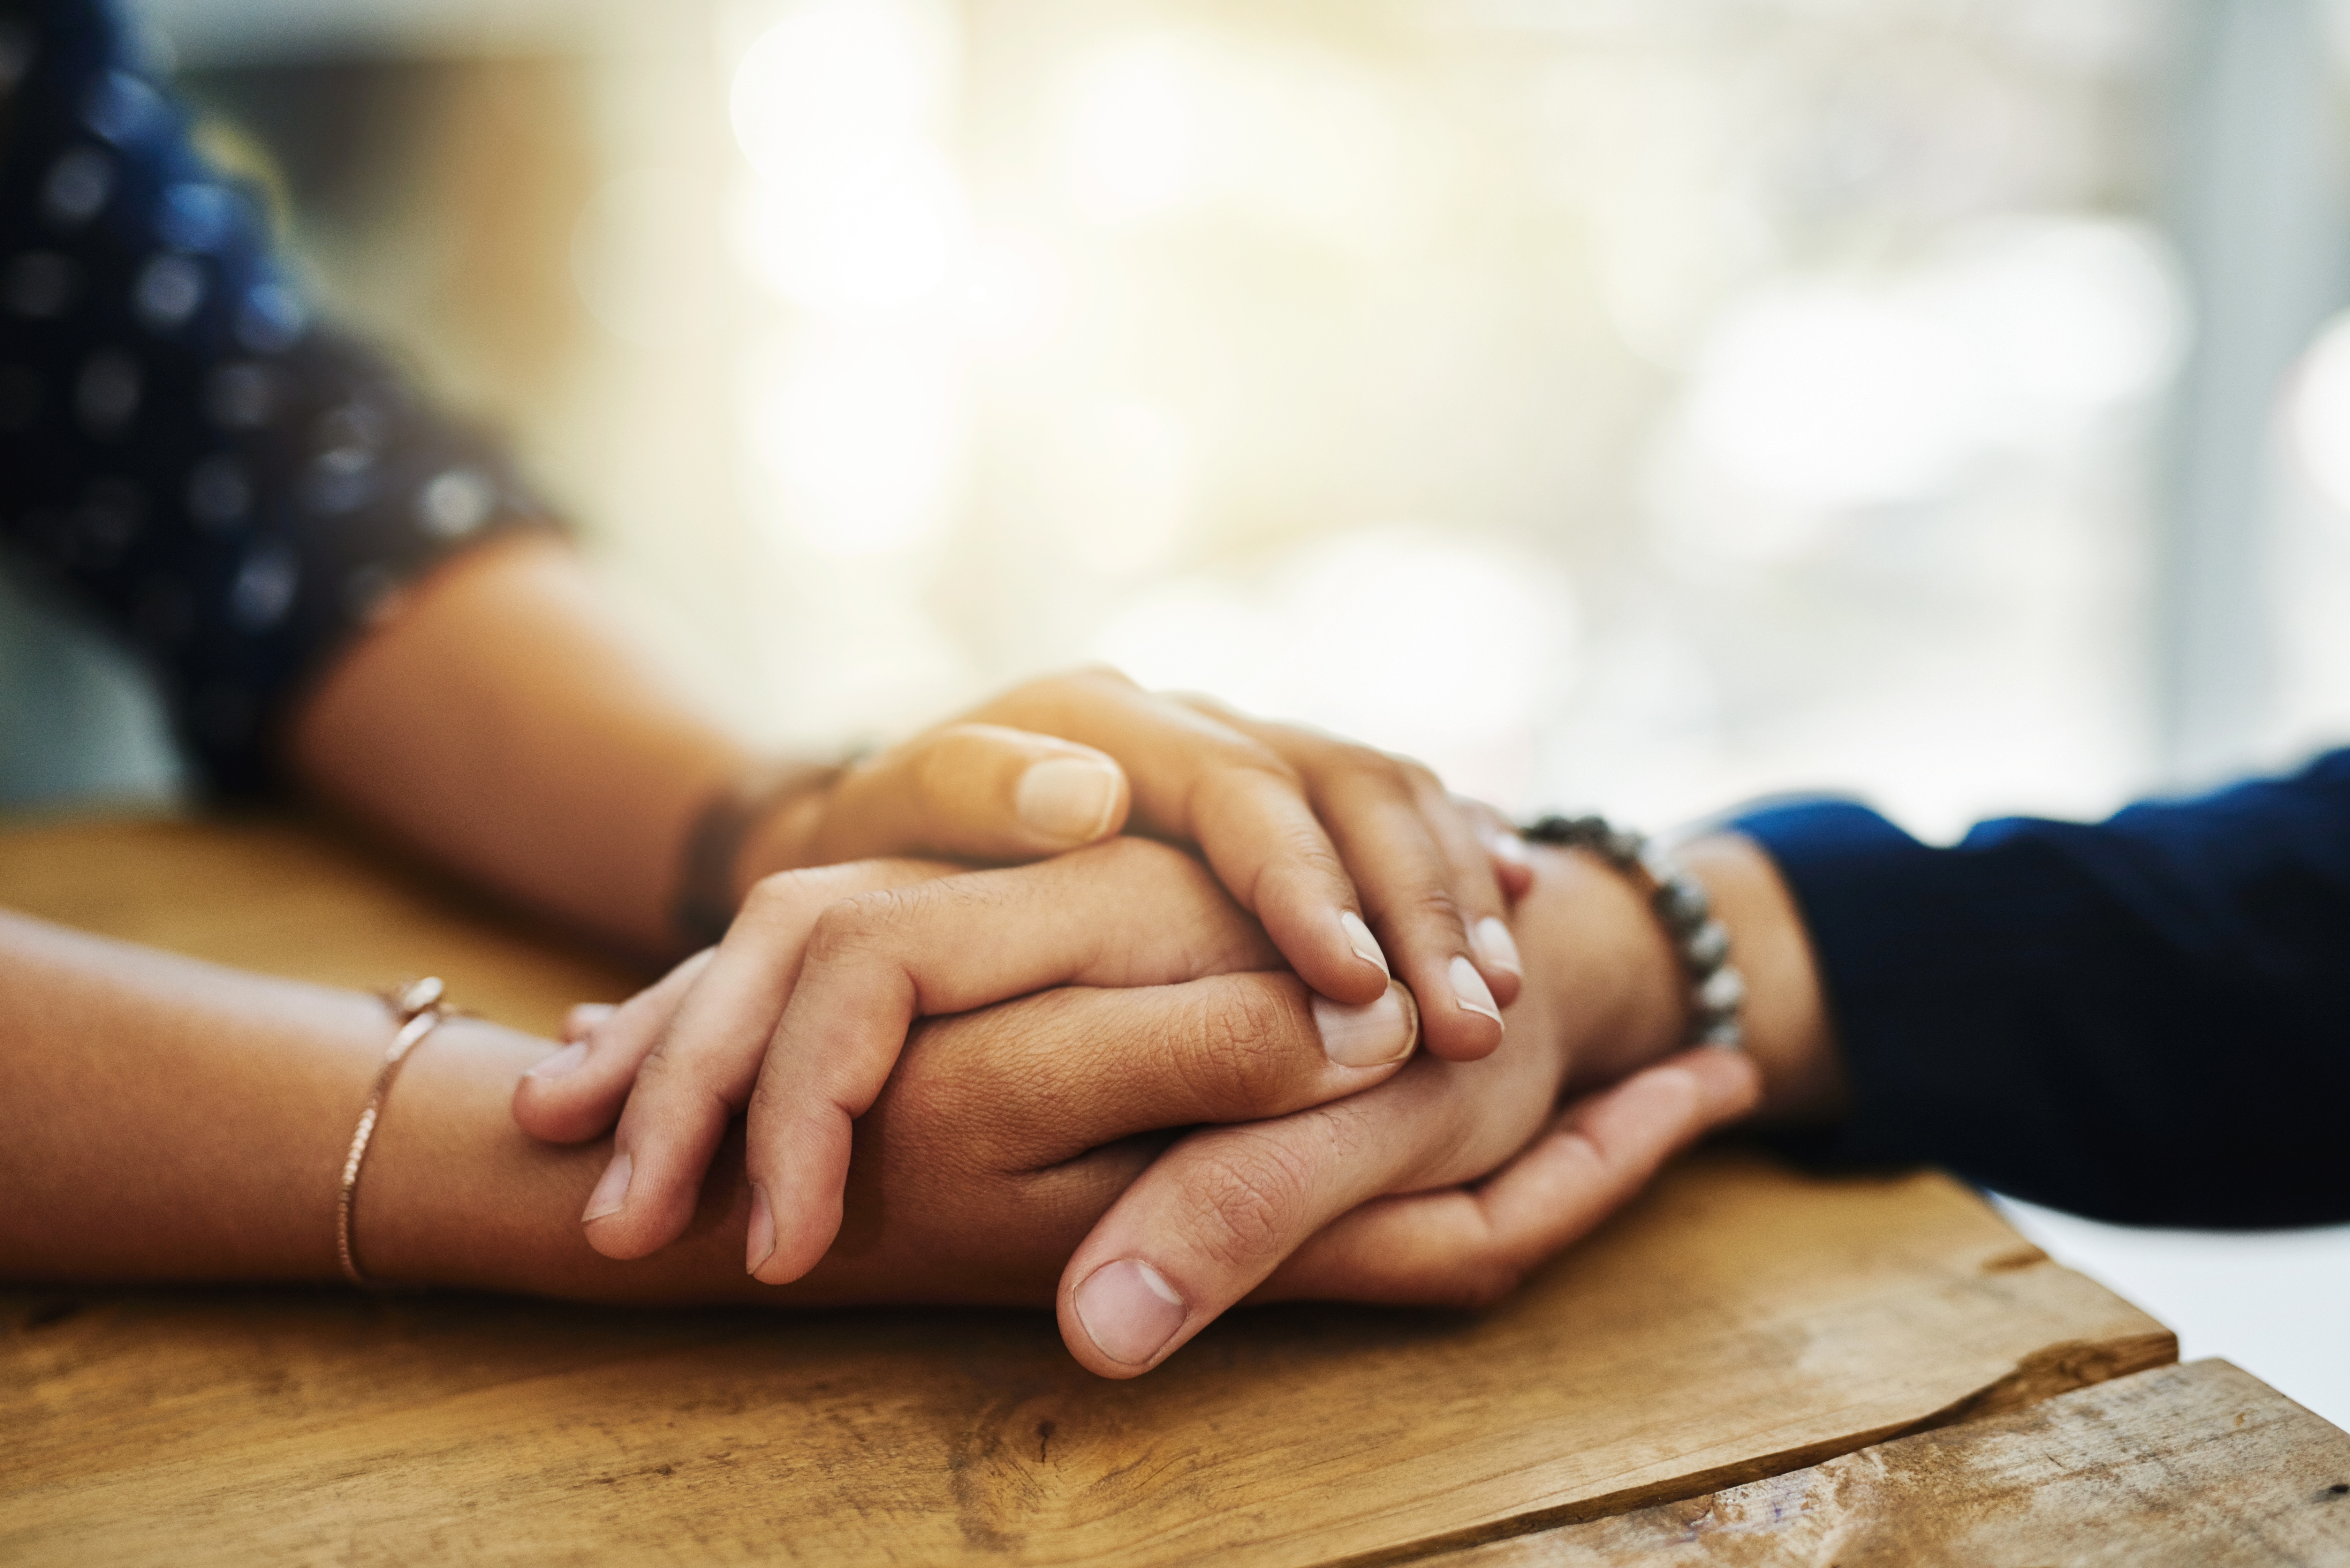 A close-up of two friends holding hands in a show of support | Source: Shutterstock